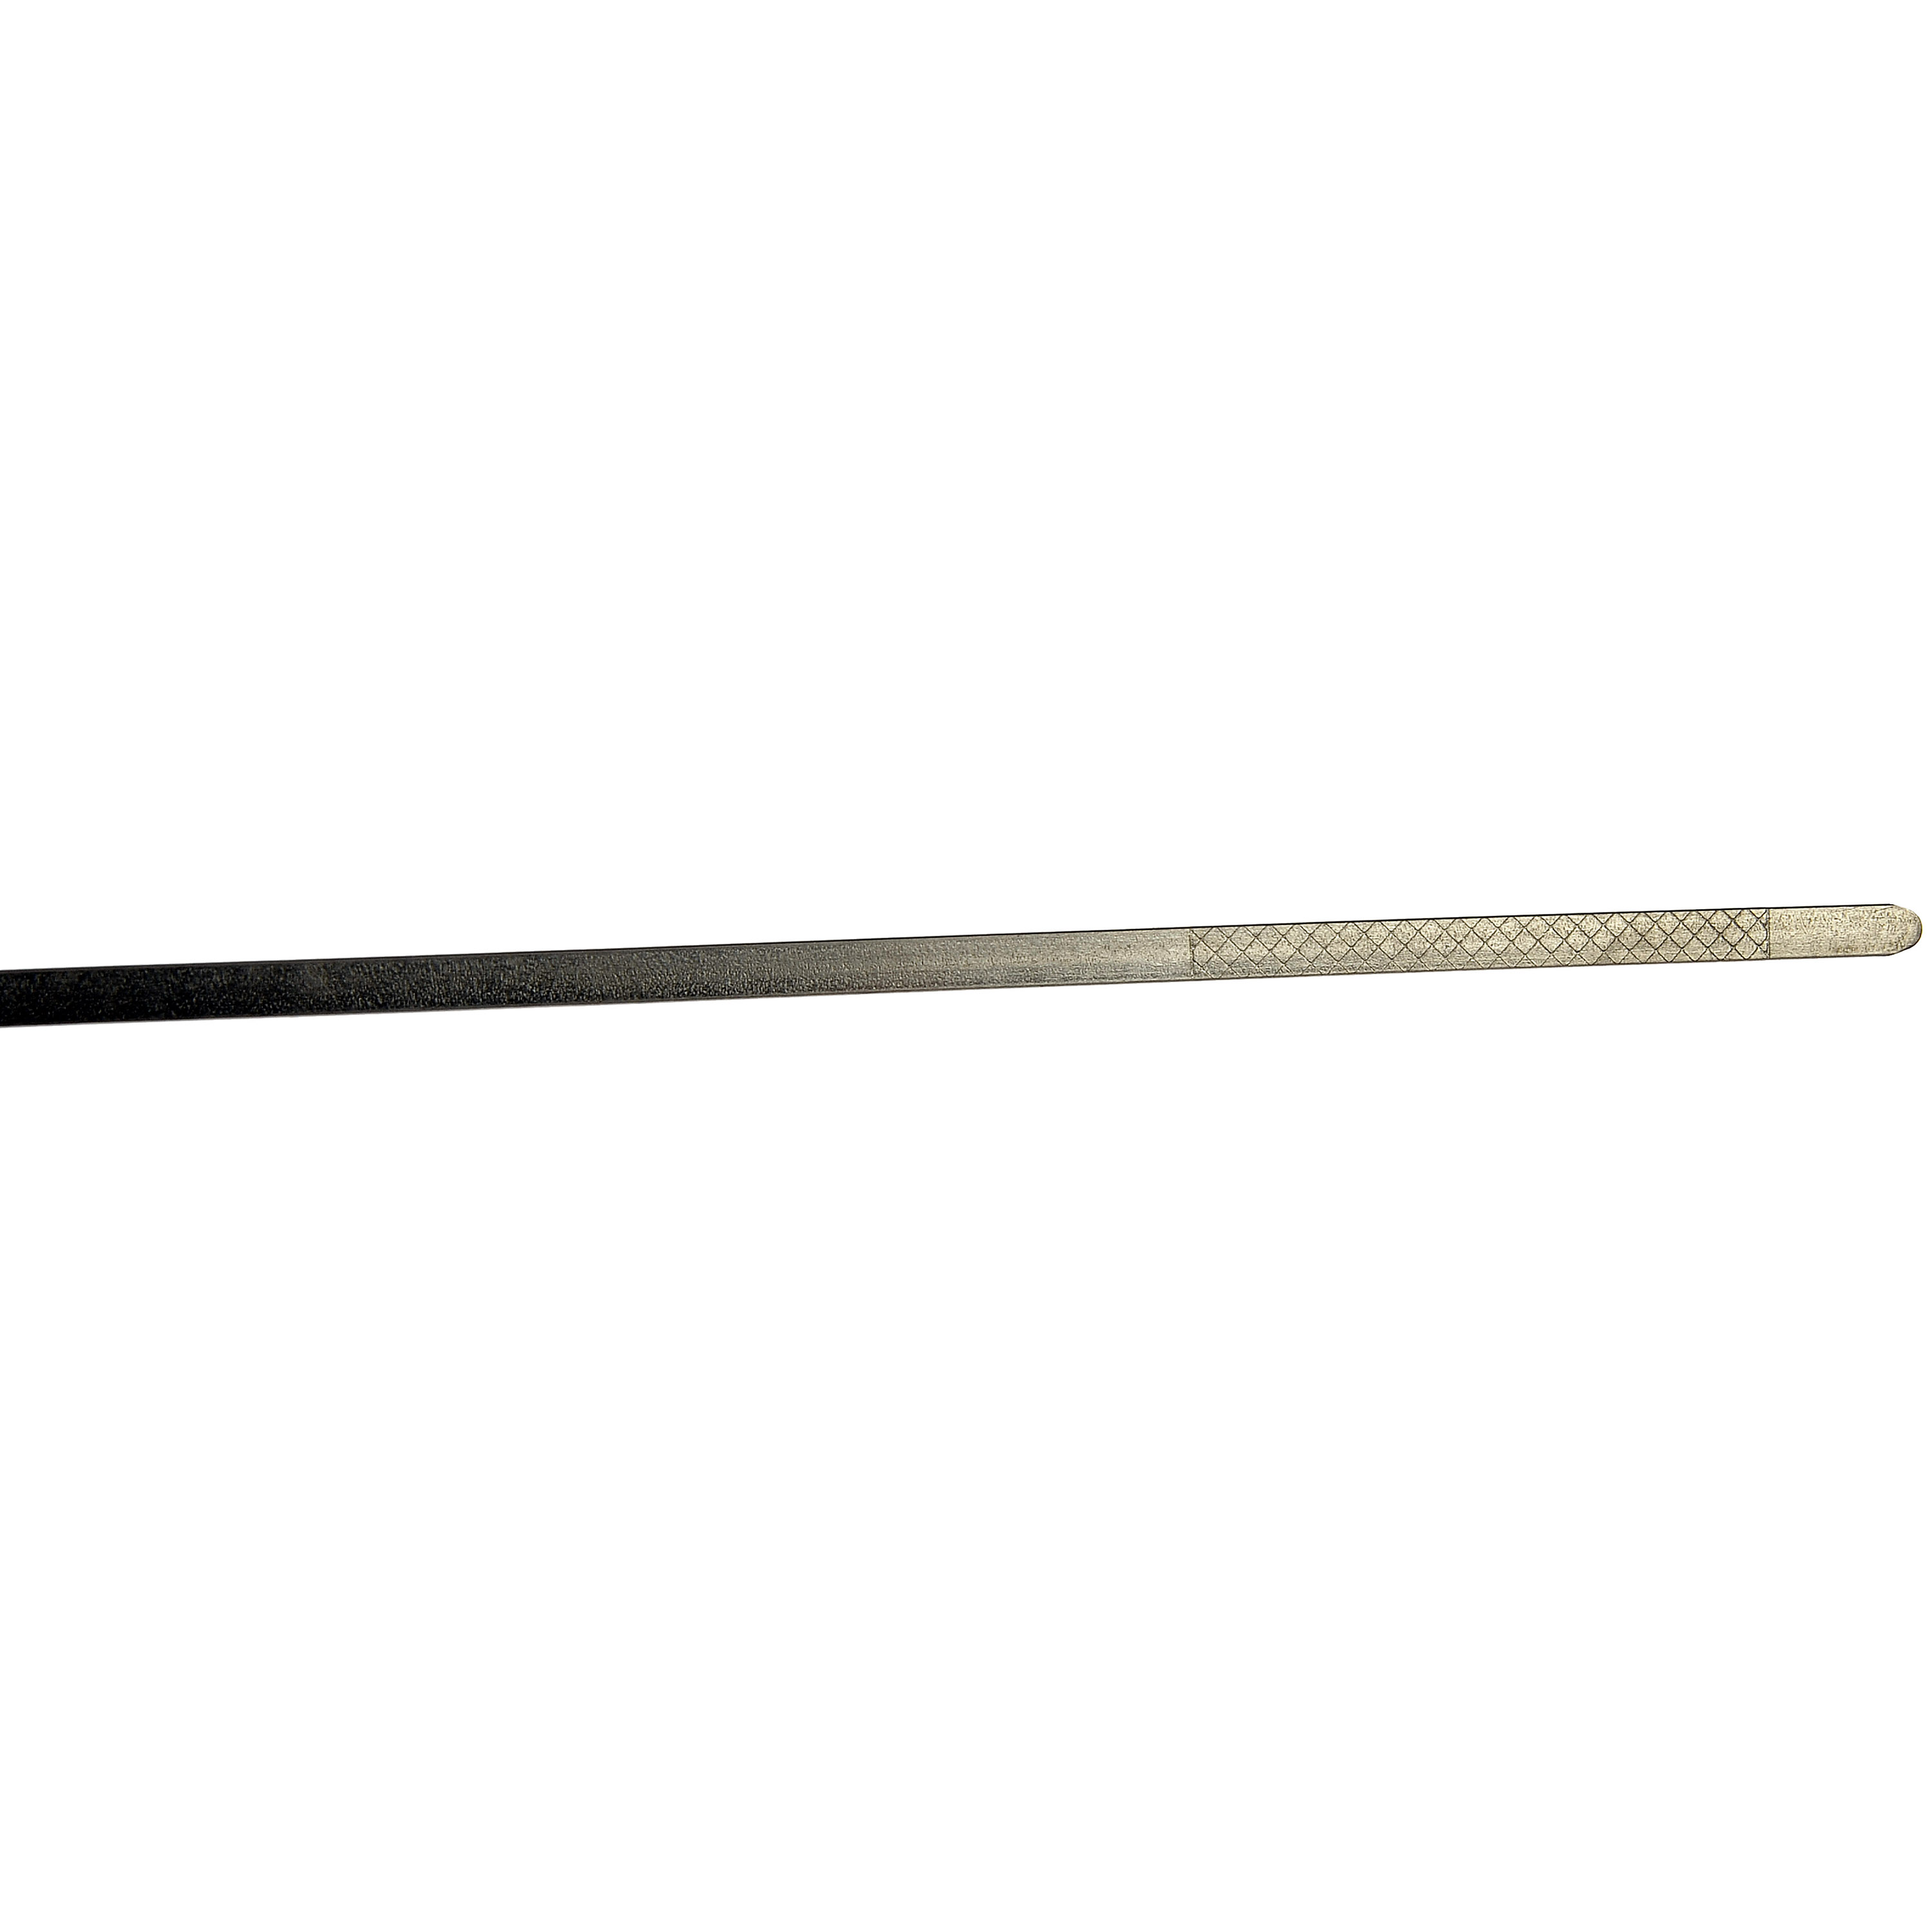 Dorman 921-137 Engine Oil Dipstick for Specific Scion / Toyota Models Fits  select: 2007-2019 TOYOTA YARIS, 2004-2006 TOYOTA SCION XA 